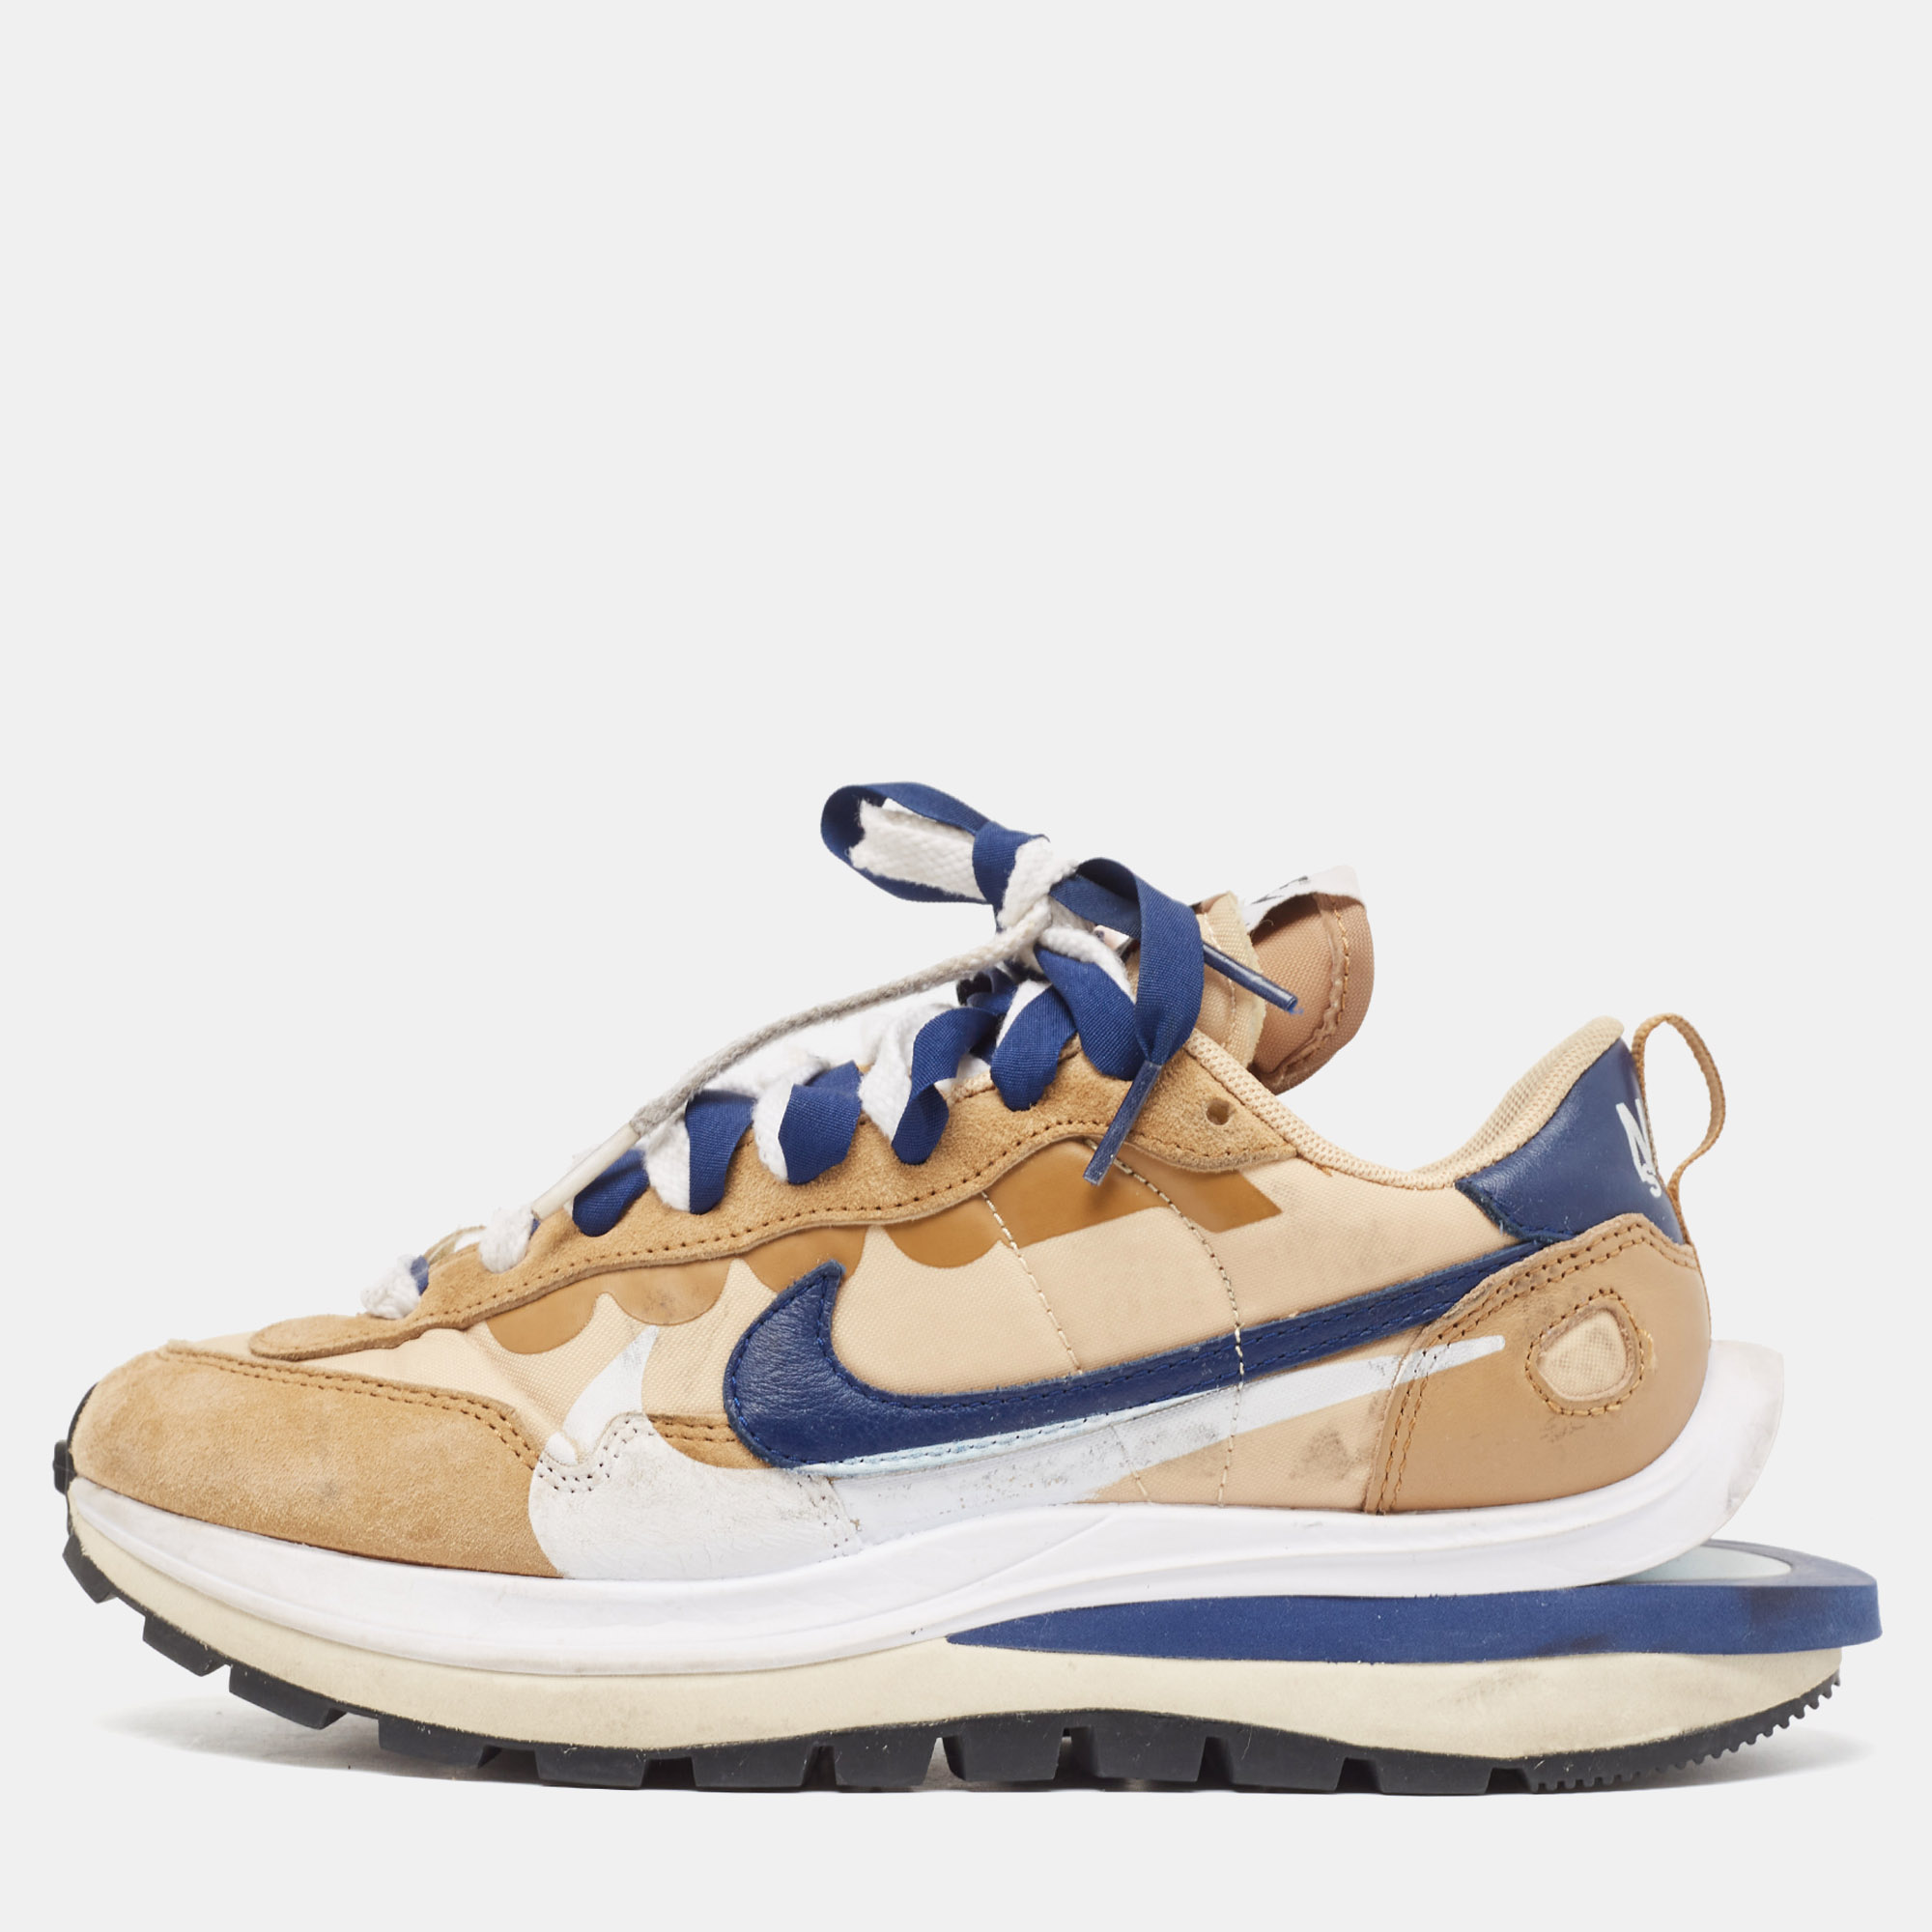 

Nike x Sacai Multicolor Leather and Fabric Vaporwaffle Sesame Blue Void Sneakers Size